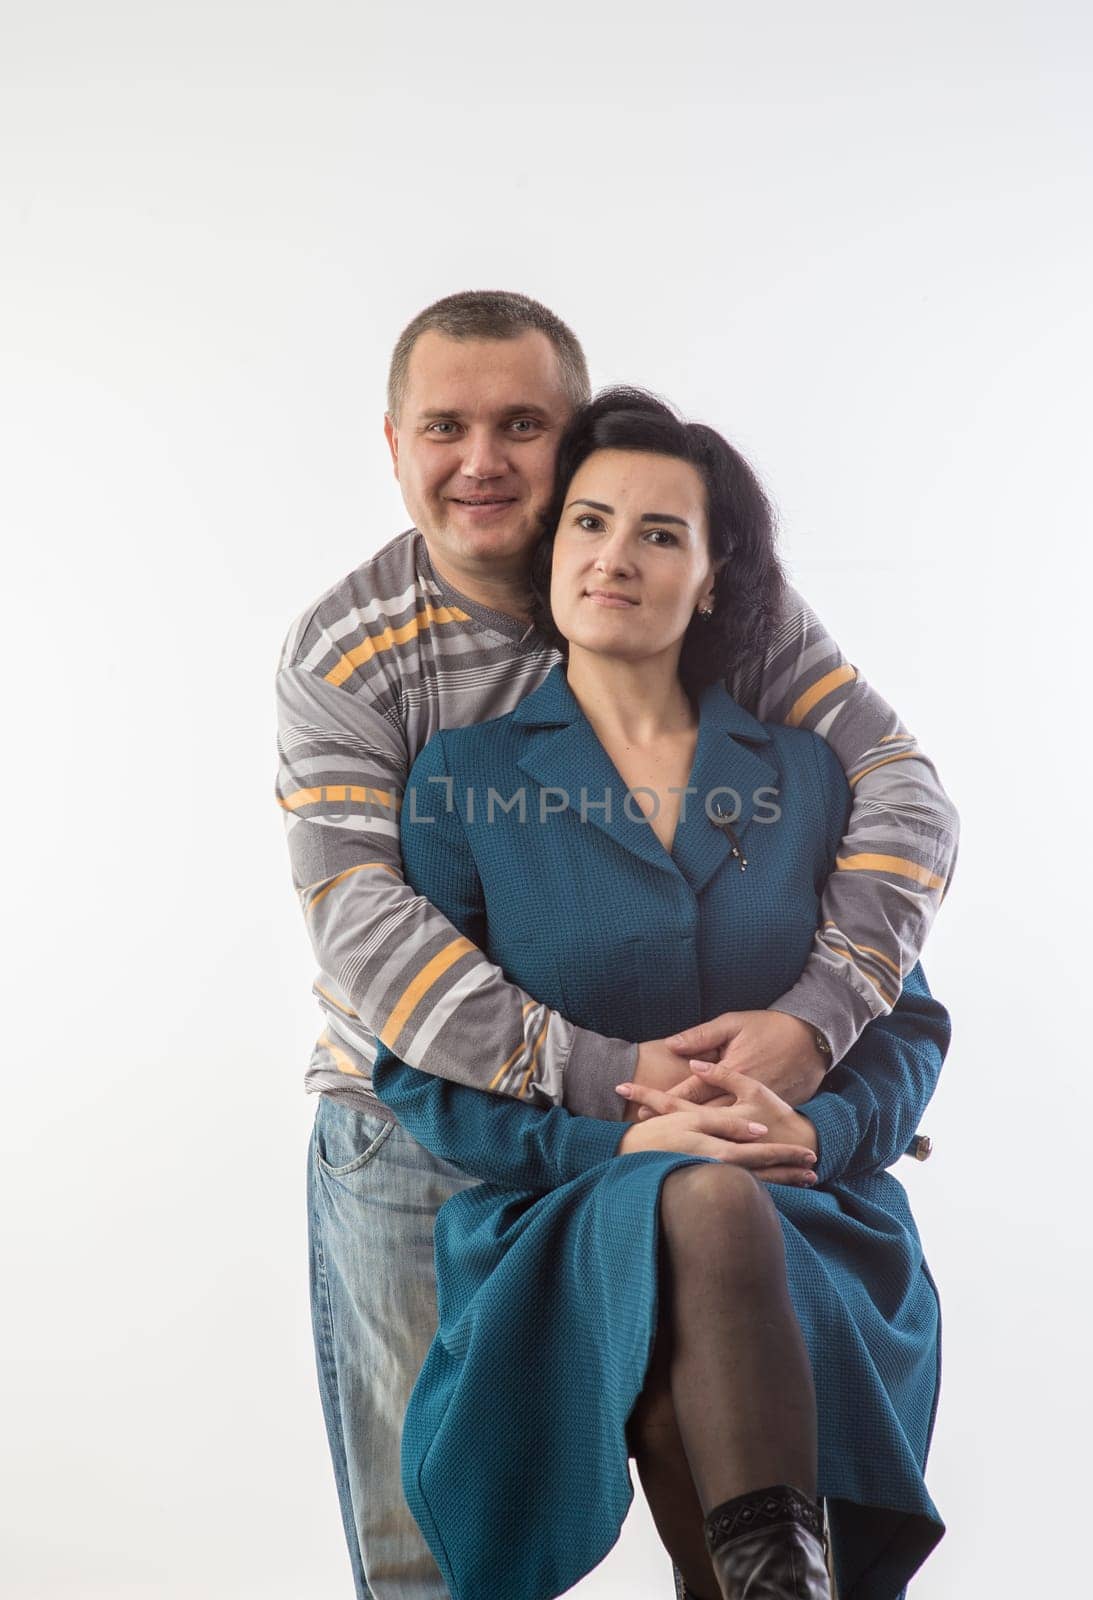 studio portrait of husband and wife happy family 1 by Mixa74